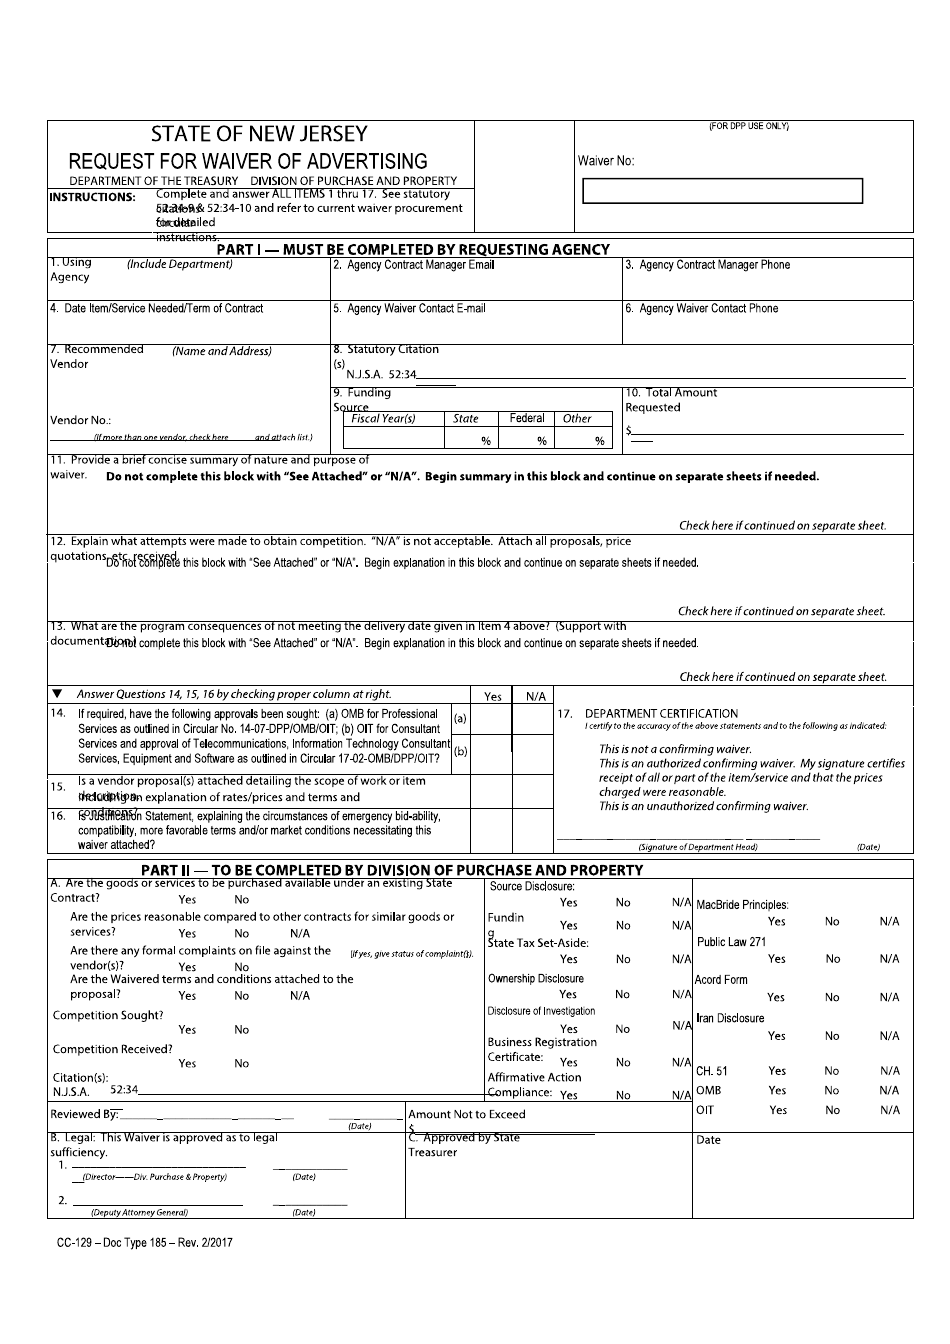 Form CC-129 Request for Waiver of Advertising - New Jersey, Page 1